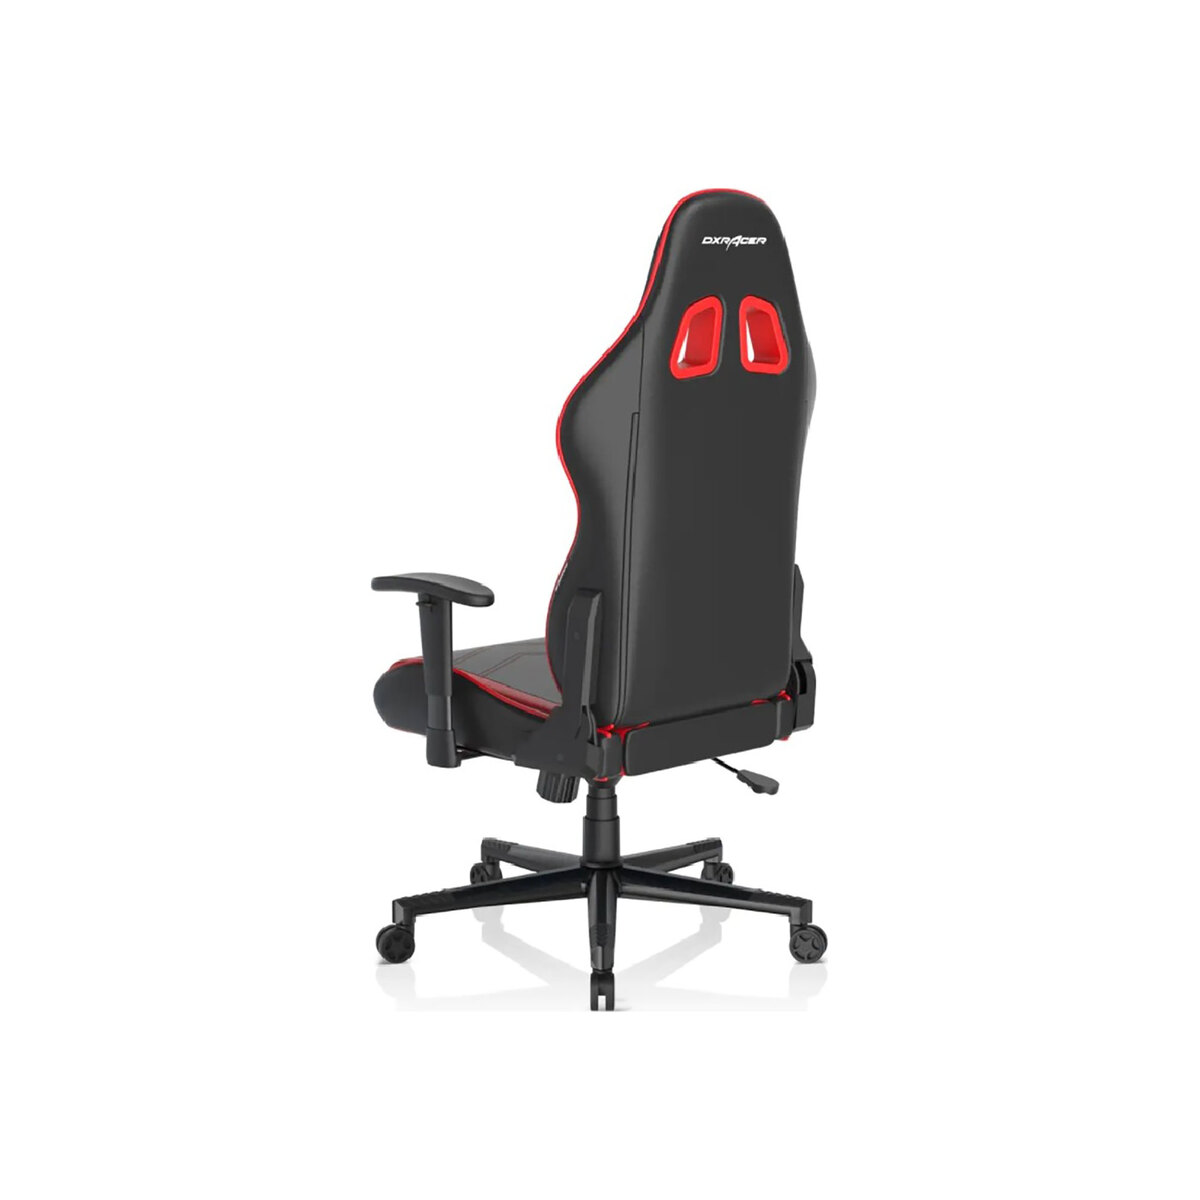 DXRacer P132 Prince Series Gaming Chair Black Red